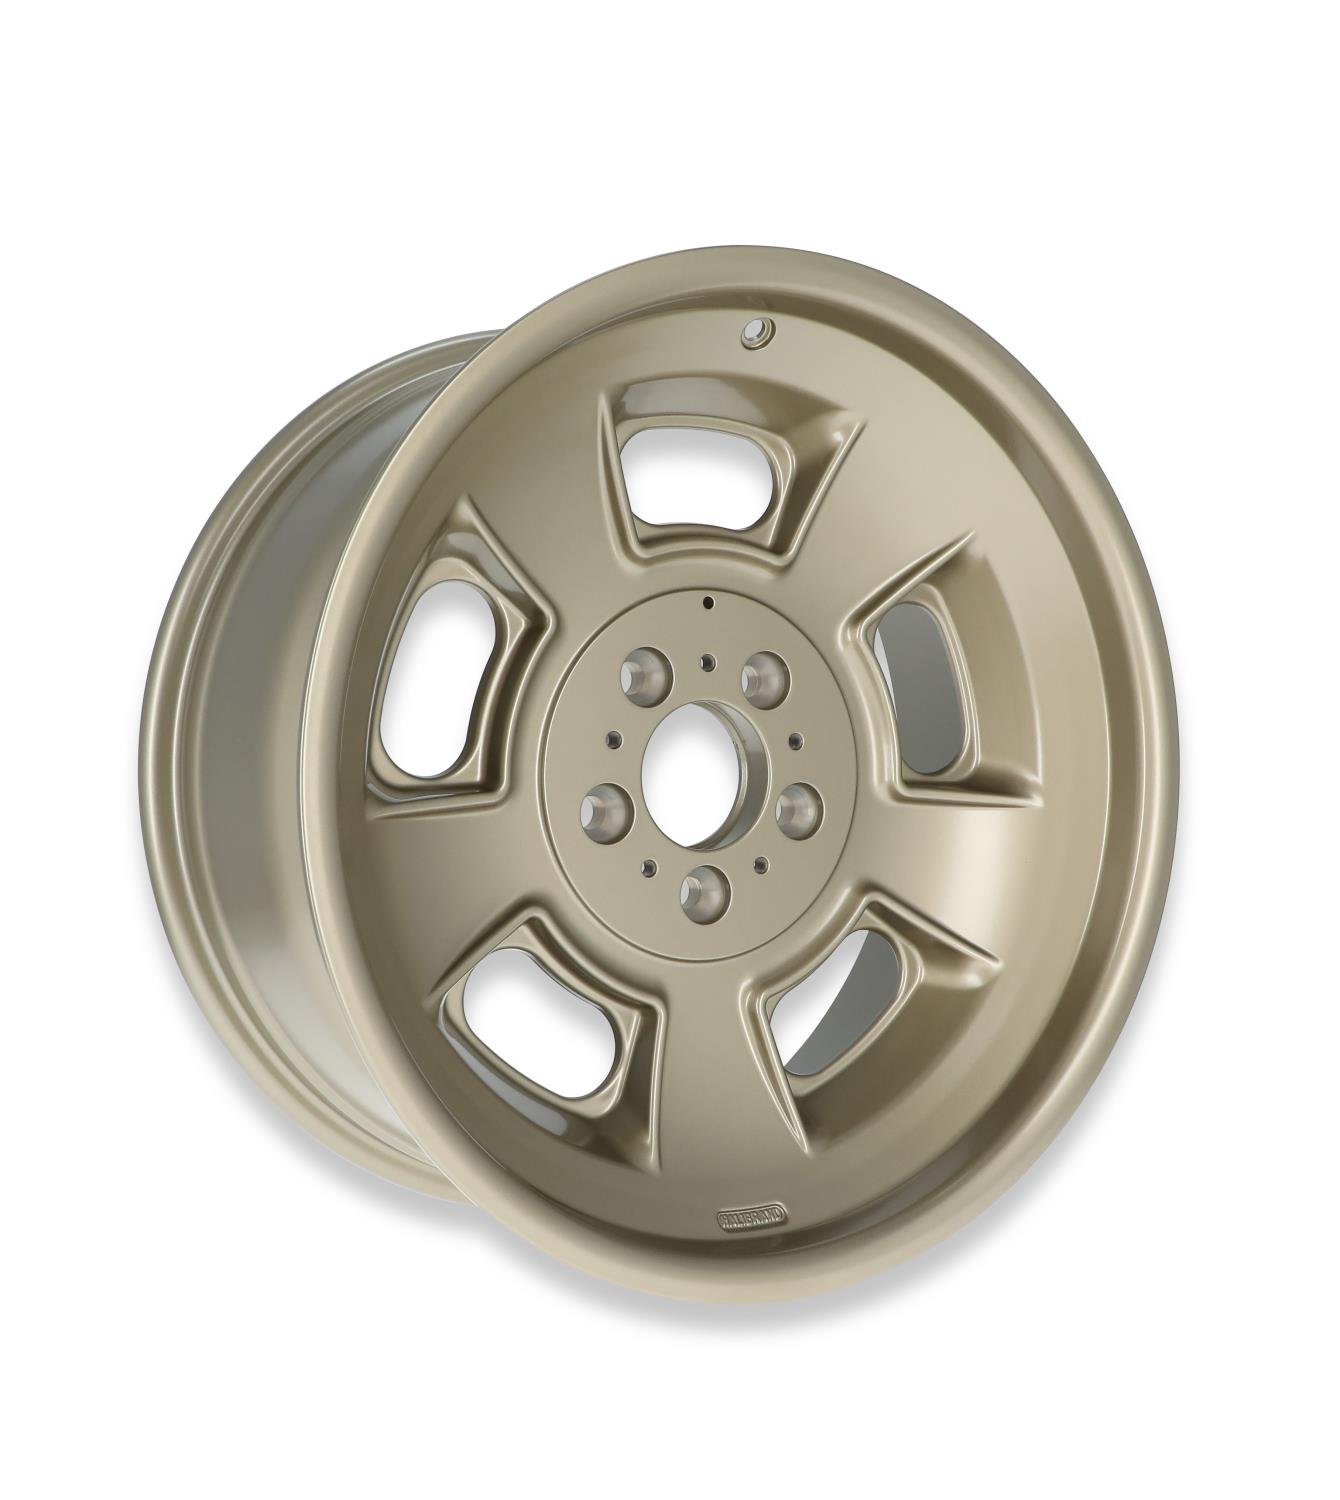 Sprint Front Wheel, Size: 19x8.5", Bolt Pattern: 5x5", Backspace: 4.75" [MAG7 - Semi Gloss Clearcoat]